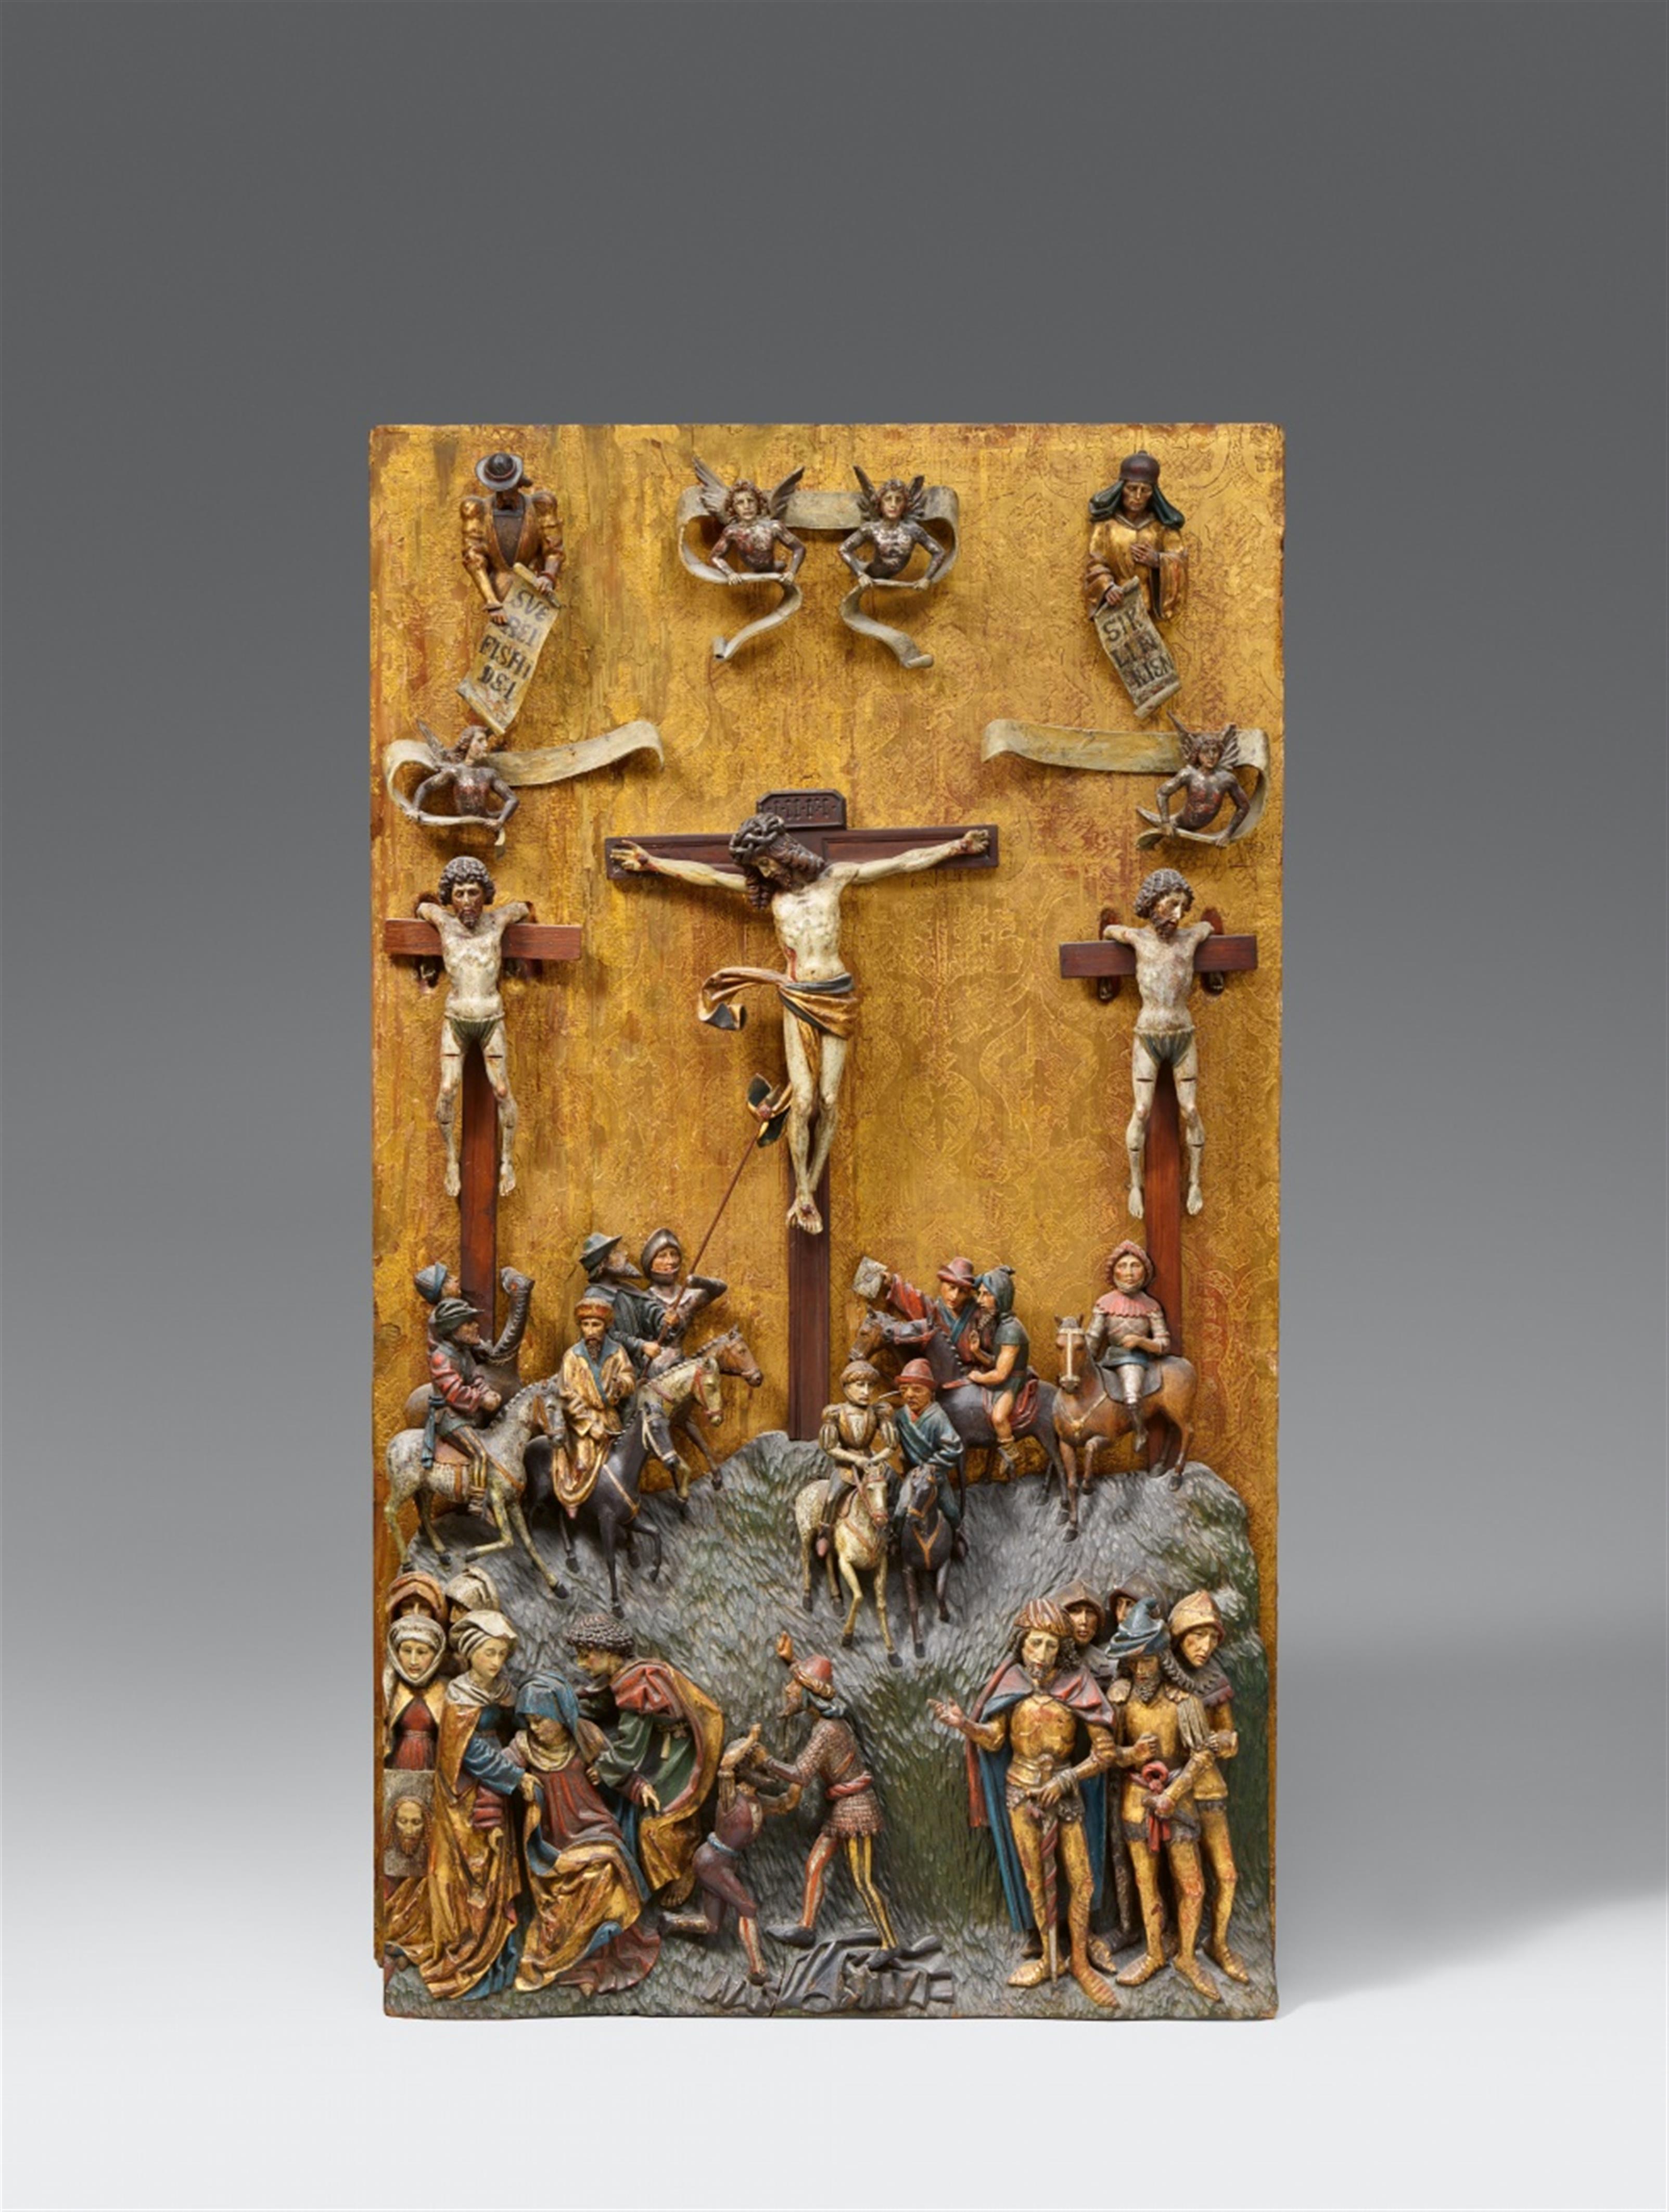 German circa 1500 and 19th century - A German crucifixion relief, circa 1500 with 19th century additions - image-1